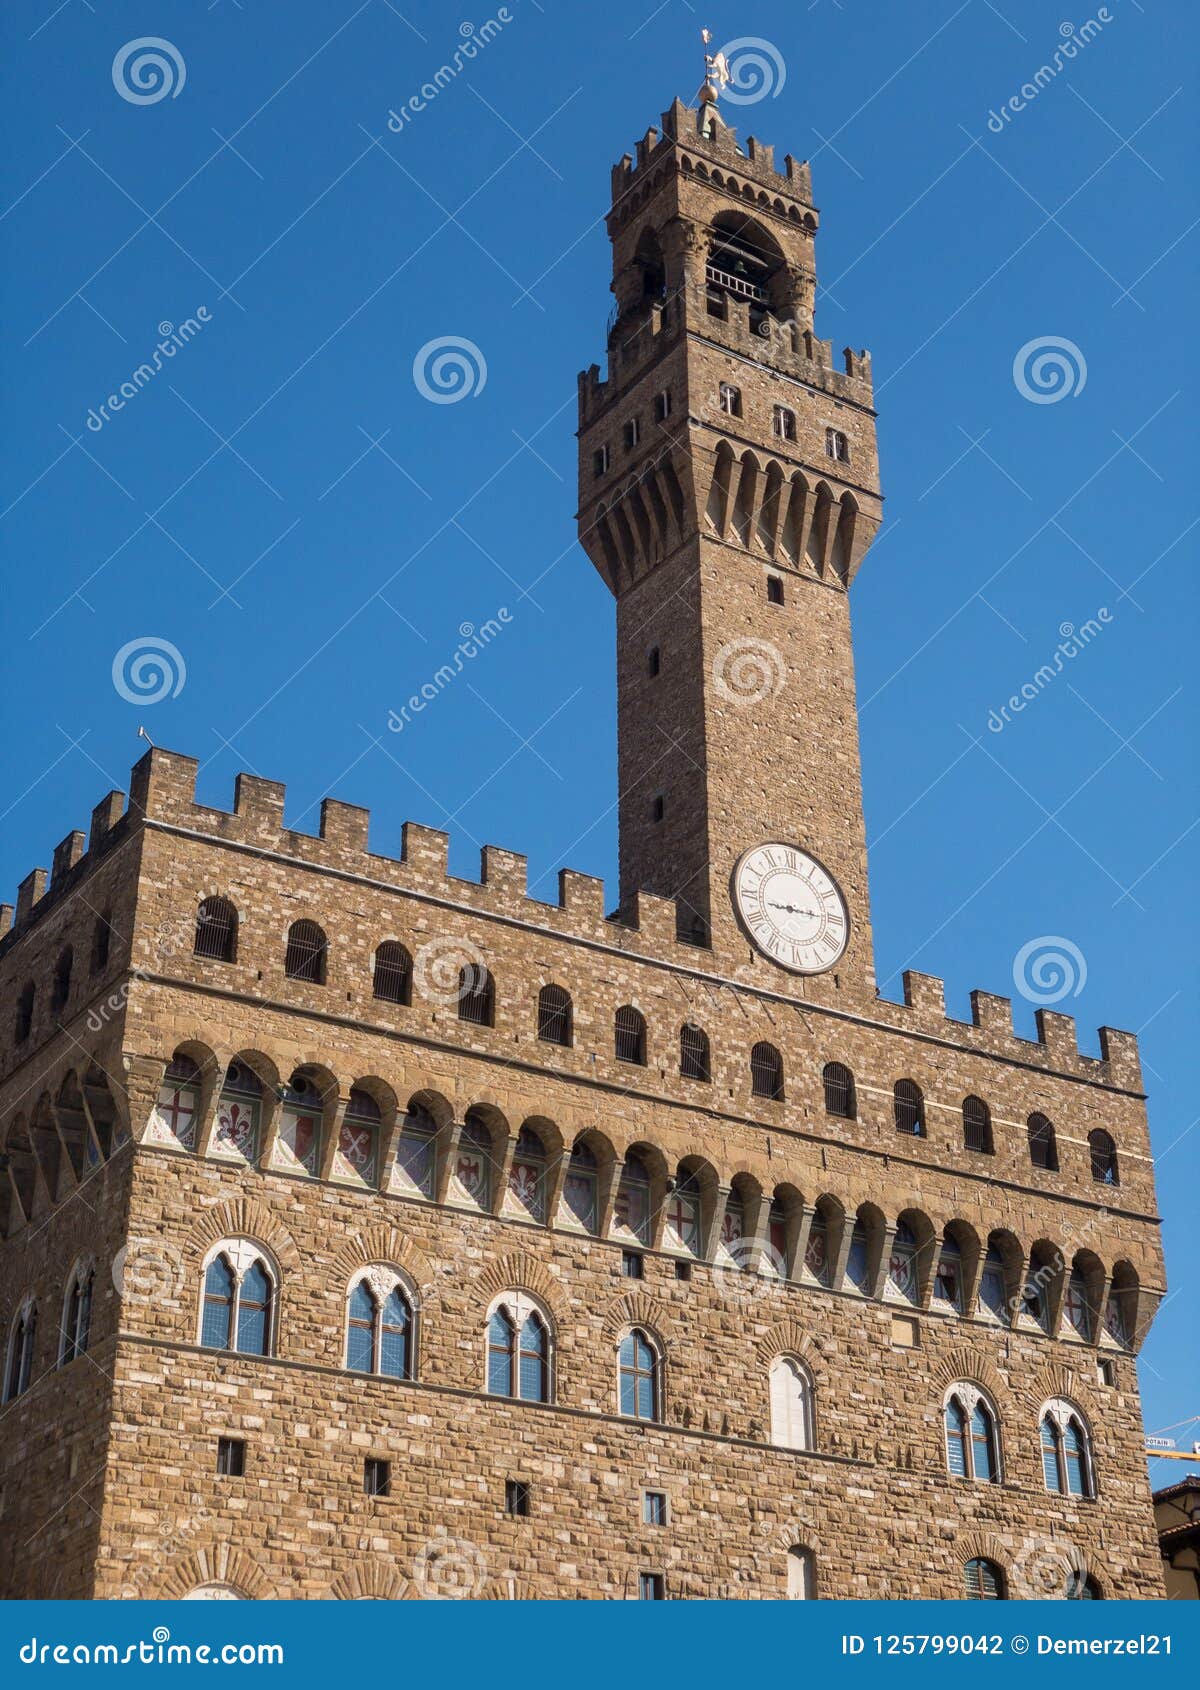 arnolfo tower - florence, italy